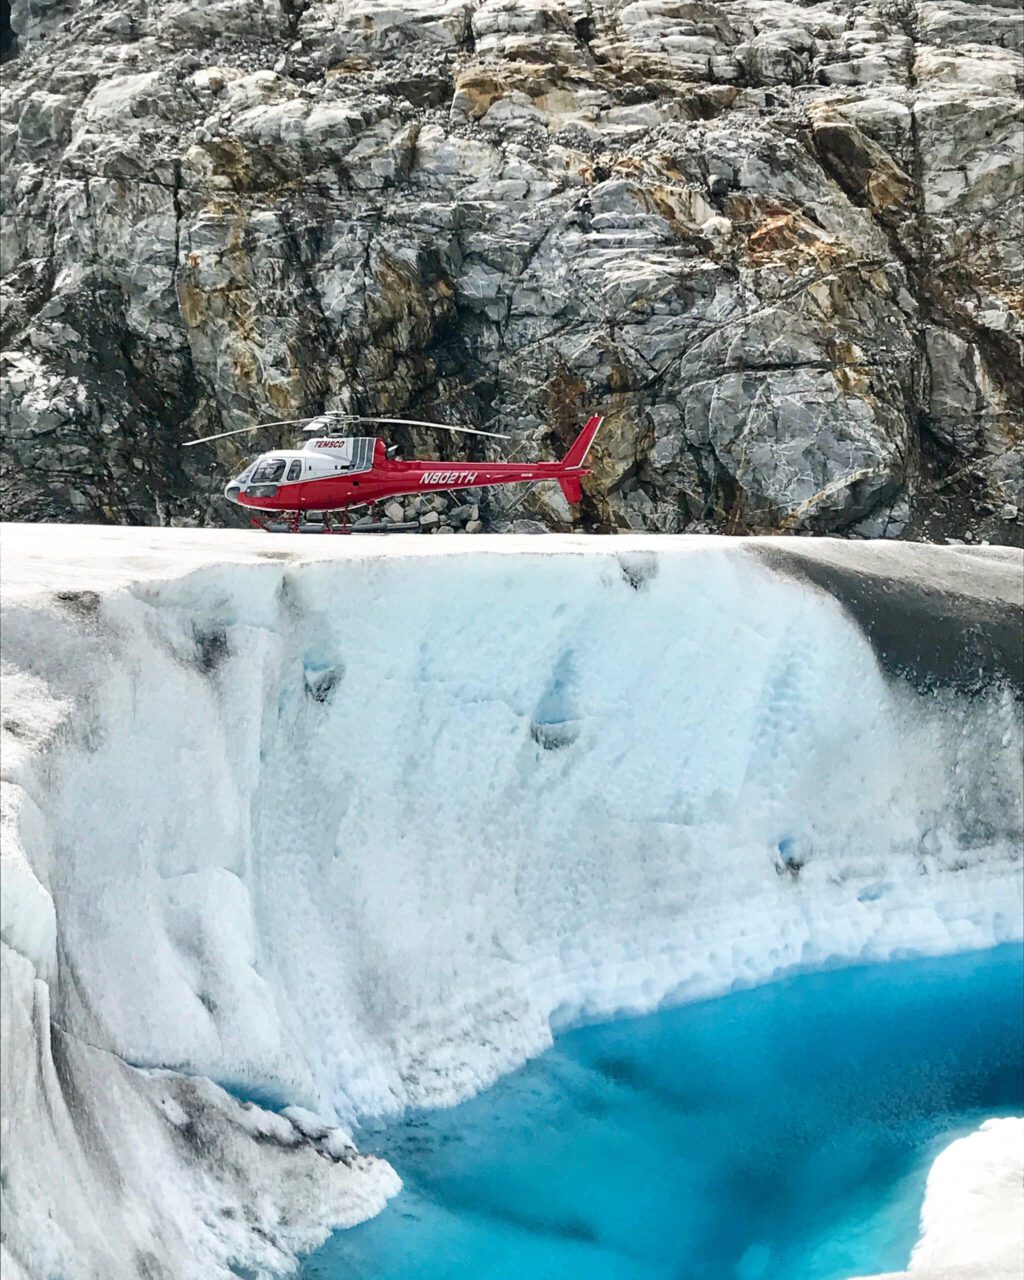 A helicopter sets down on a glacier near a blue pool of water.